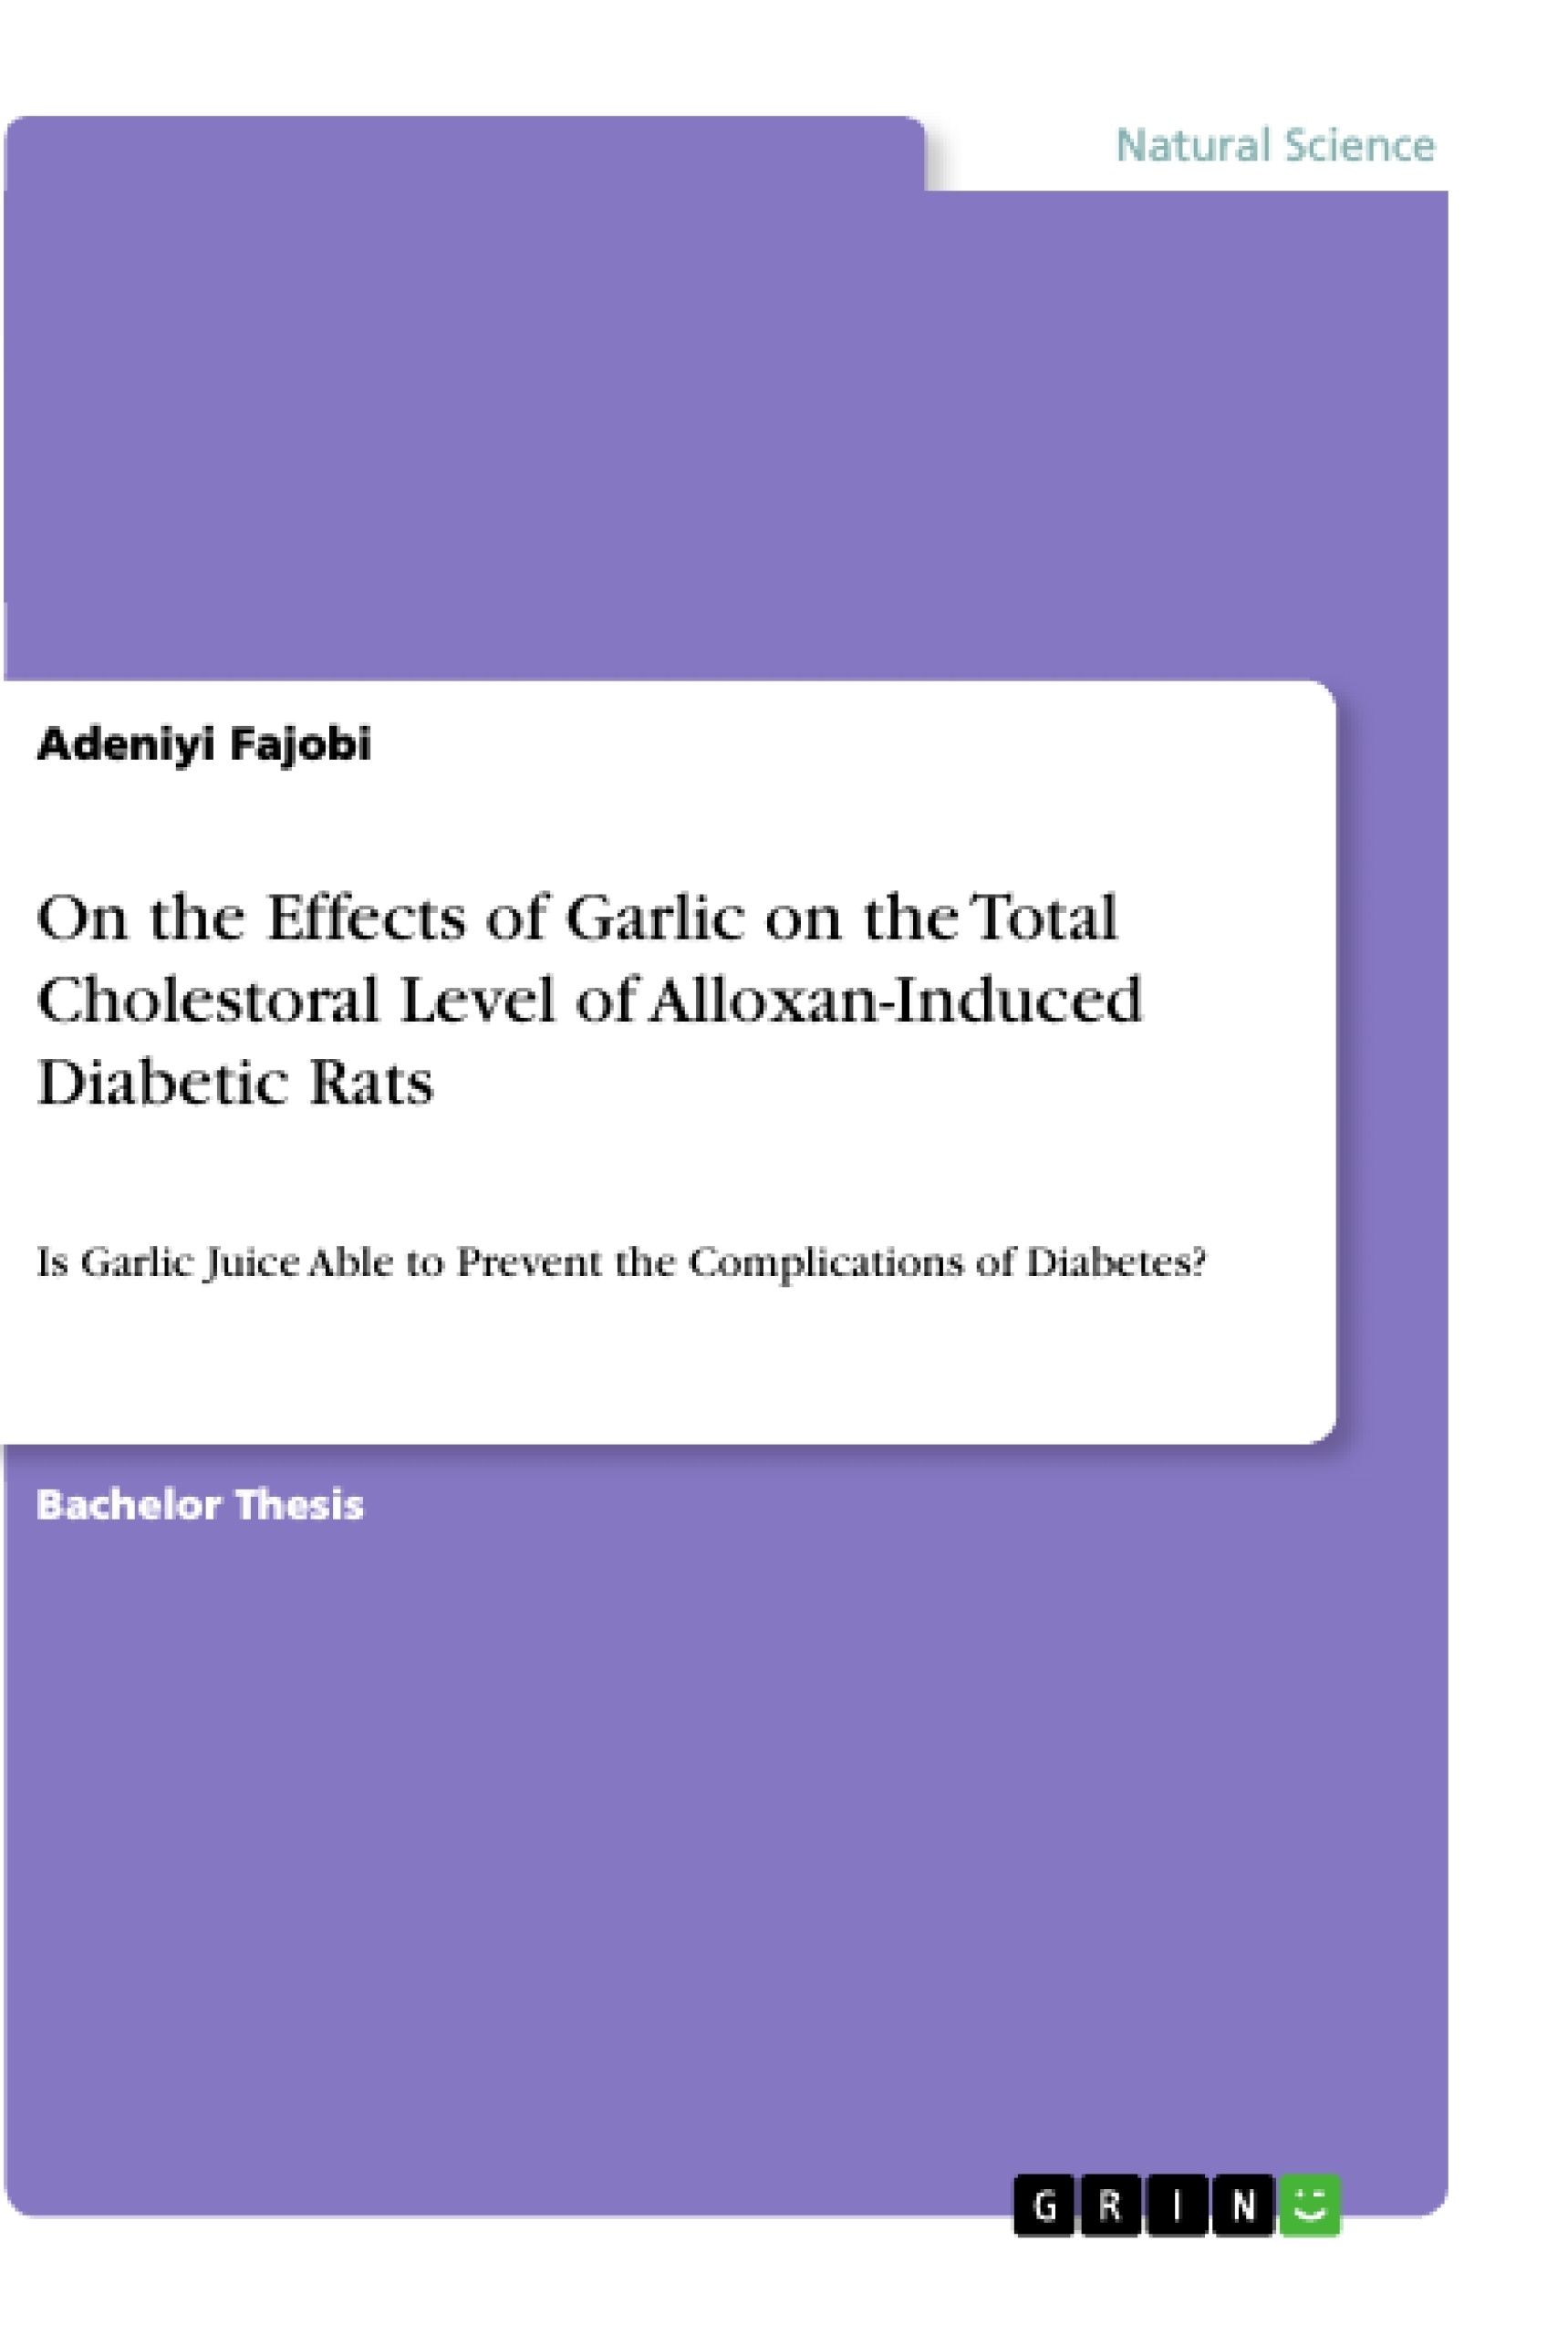 Title: On the Effects of Garlic on the Total Cholestoral Level of Alloxan-Induced Diabetic Rats